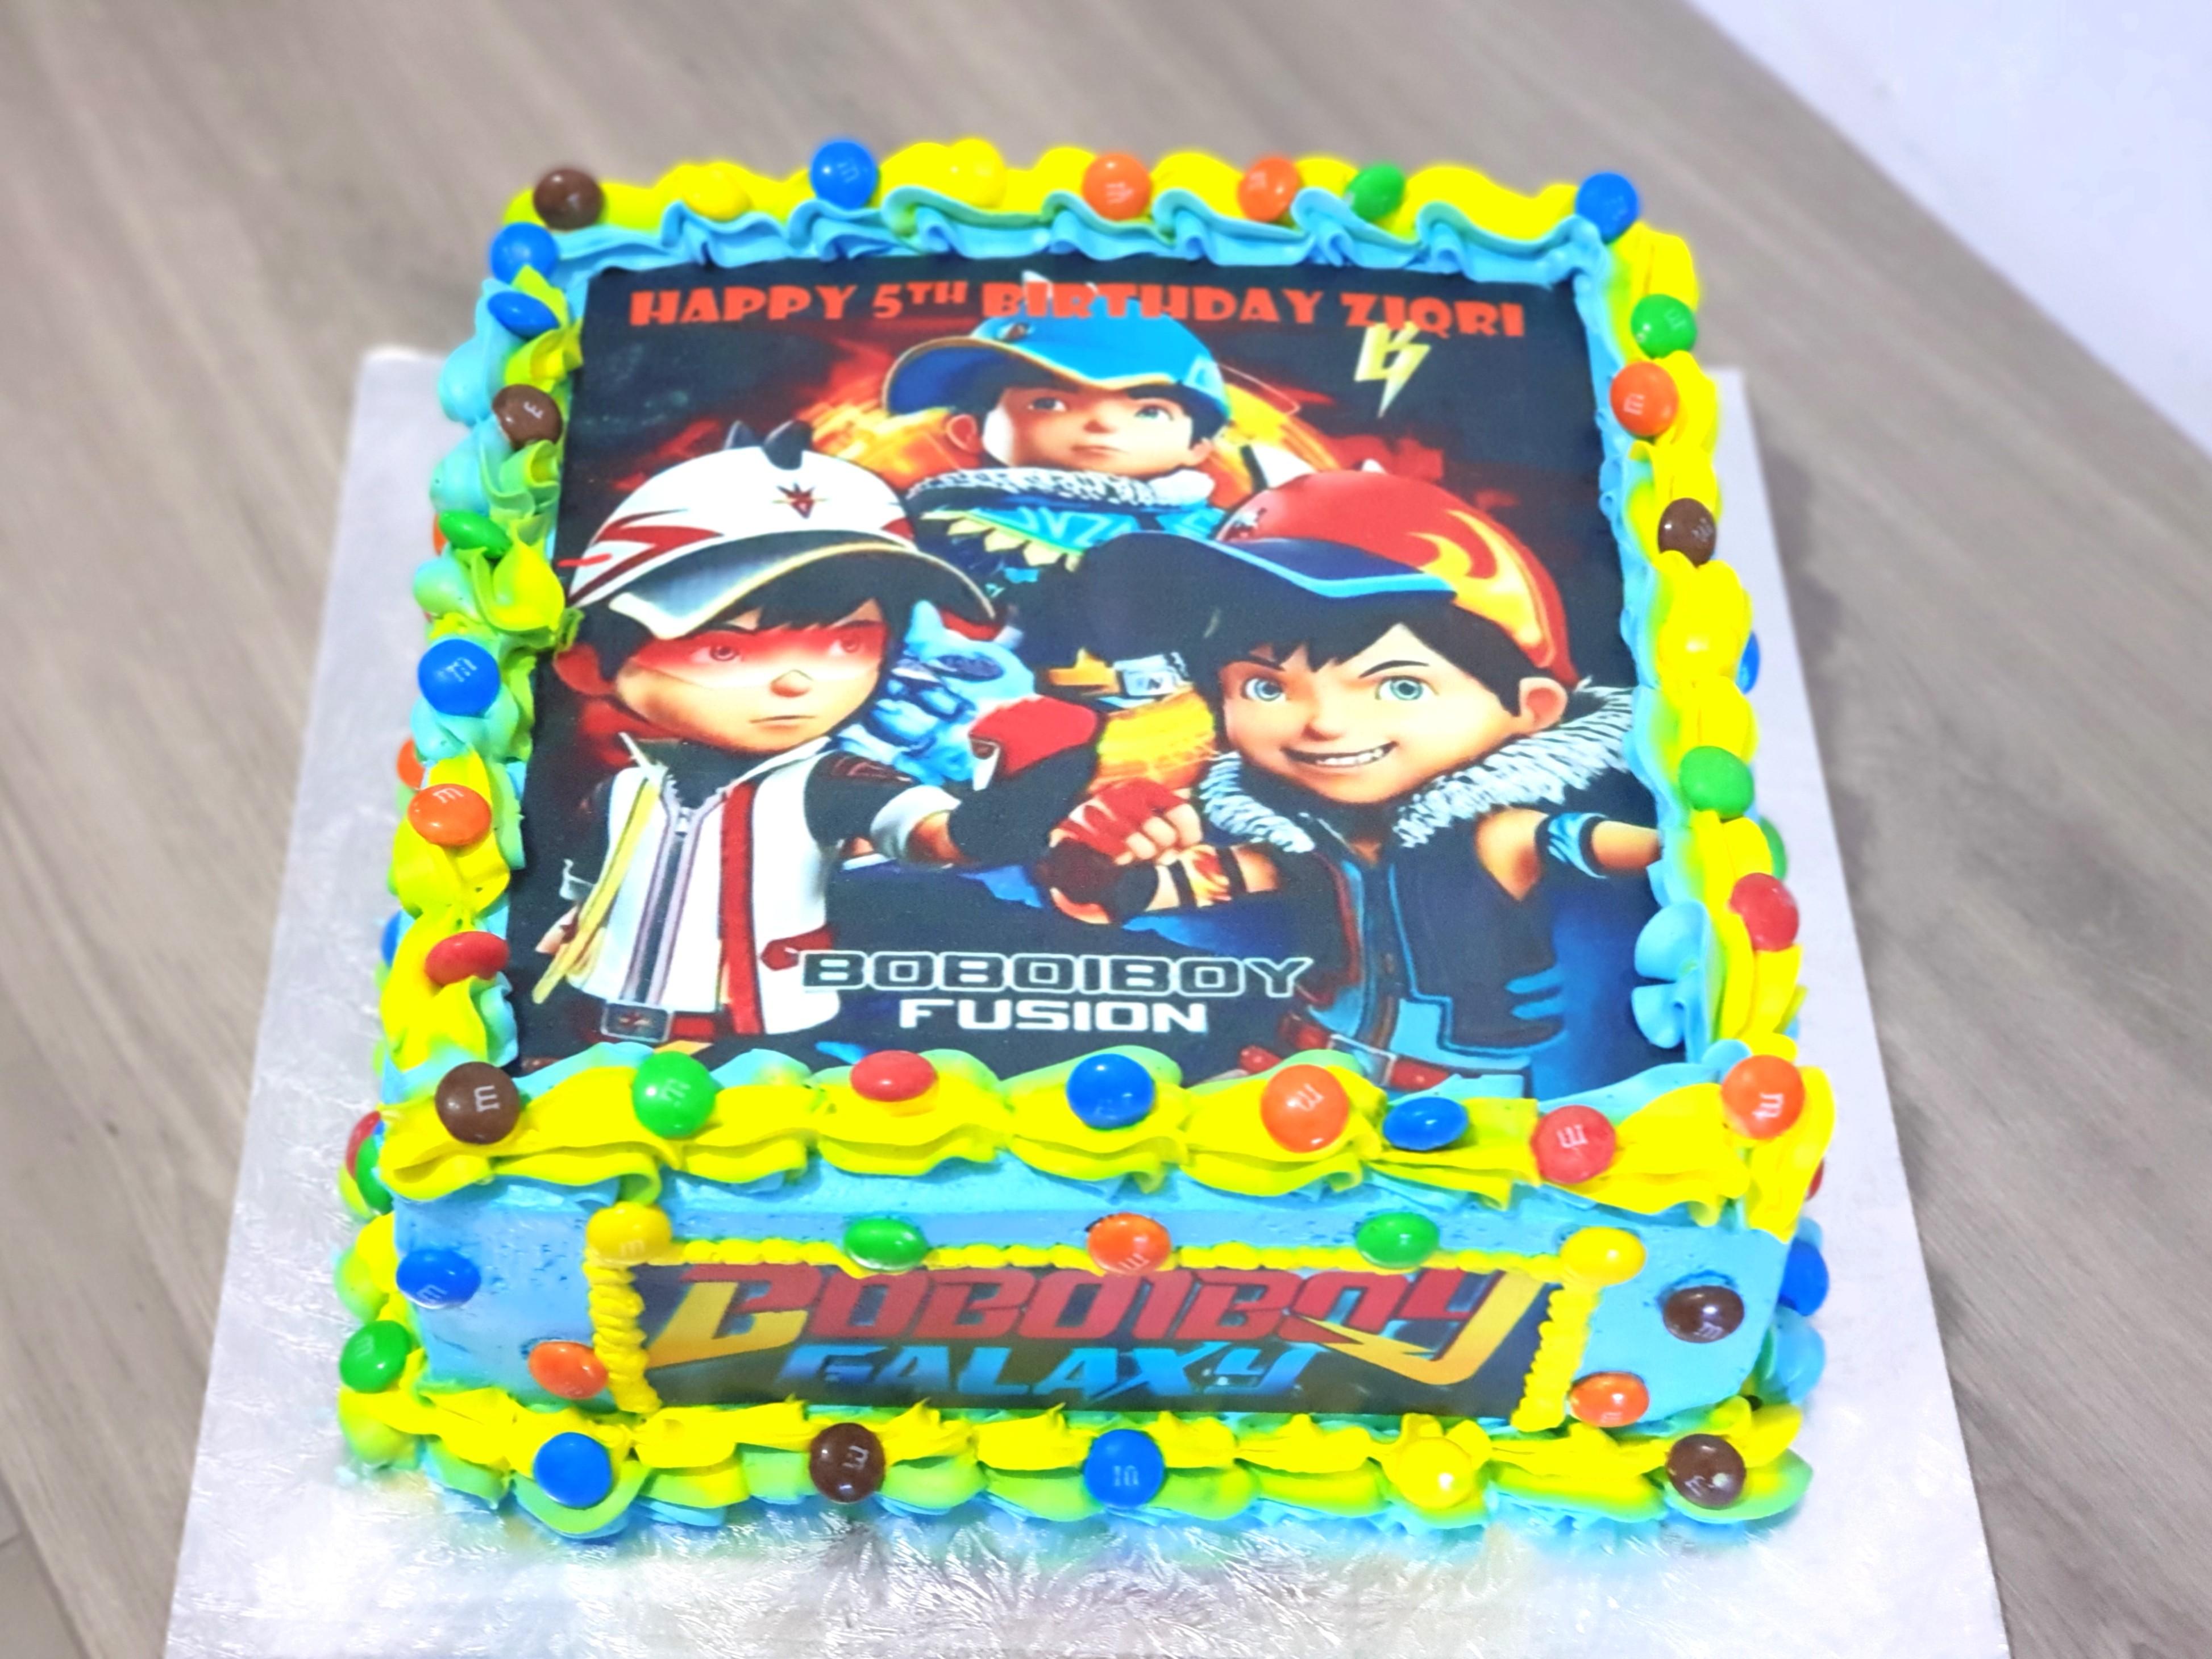 I'm going to win this race boboiboy! 🏃🏻— Boboiboy 3d birthday cake by  Sooperlicious. – Sooperlicious Cakes